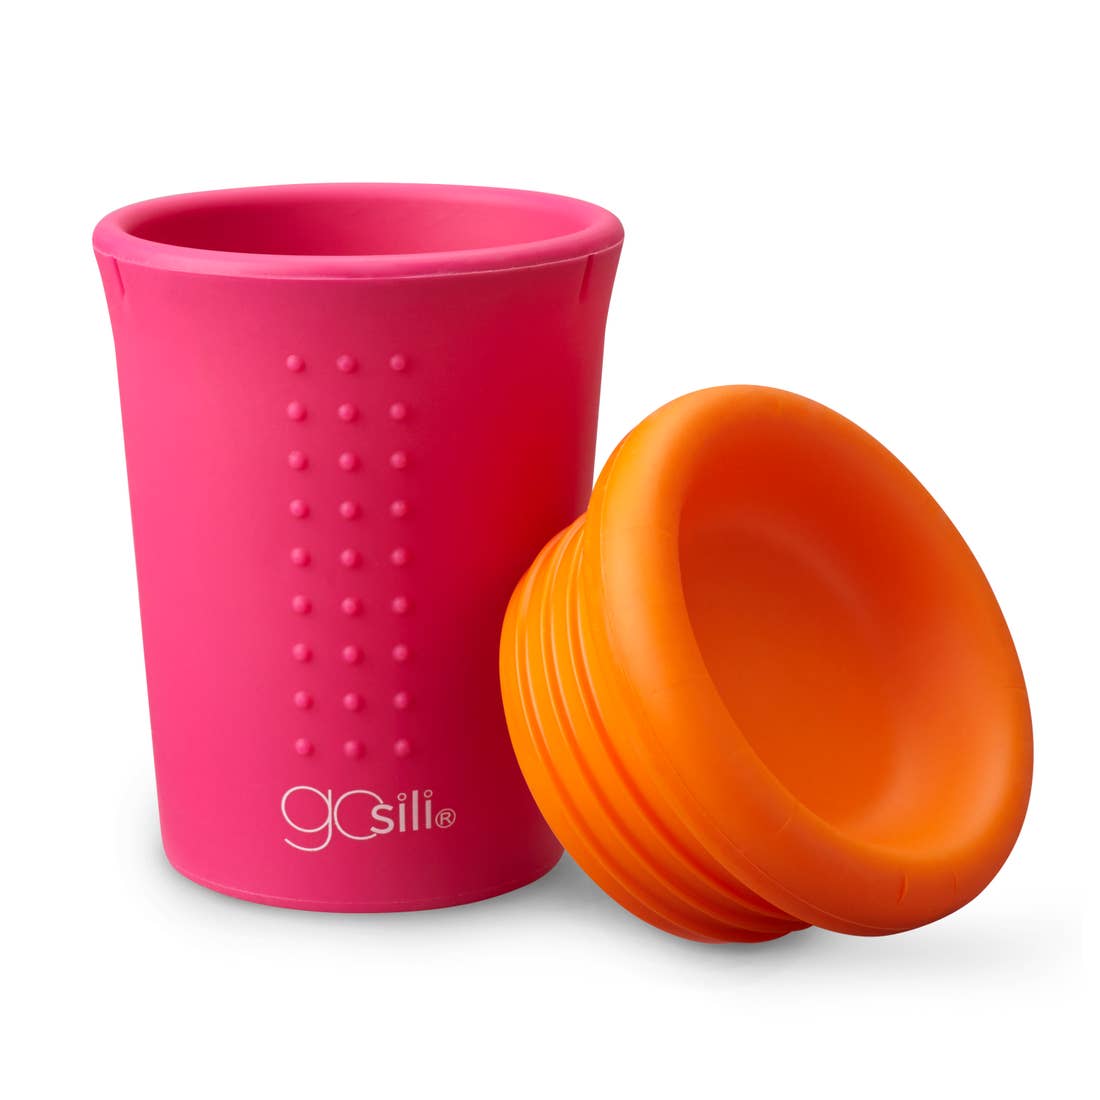 Oh! No Spill Cup – The Nest & Company